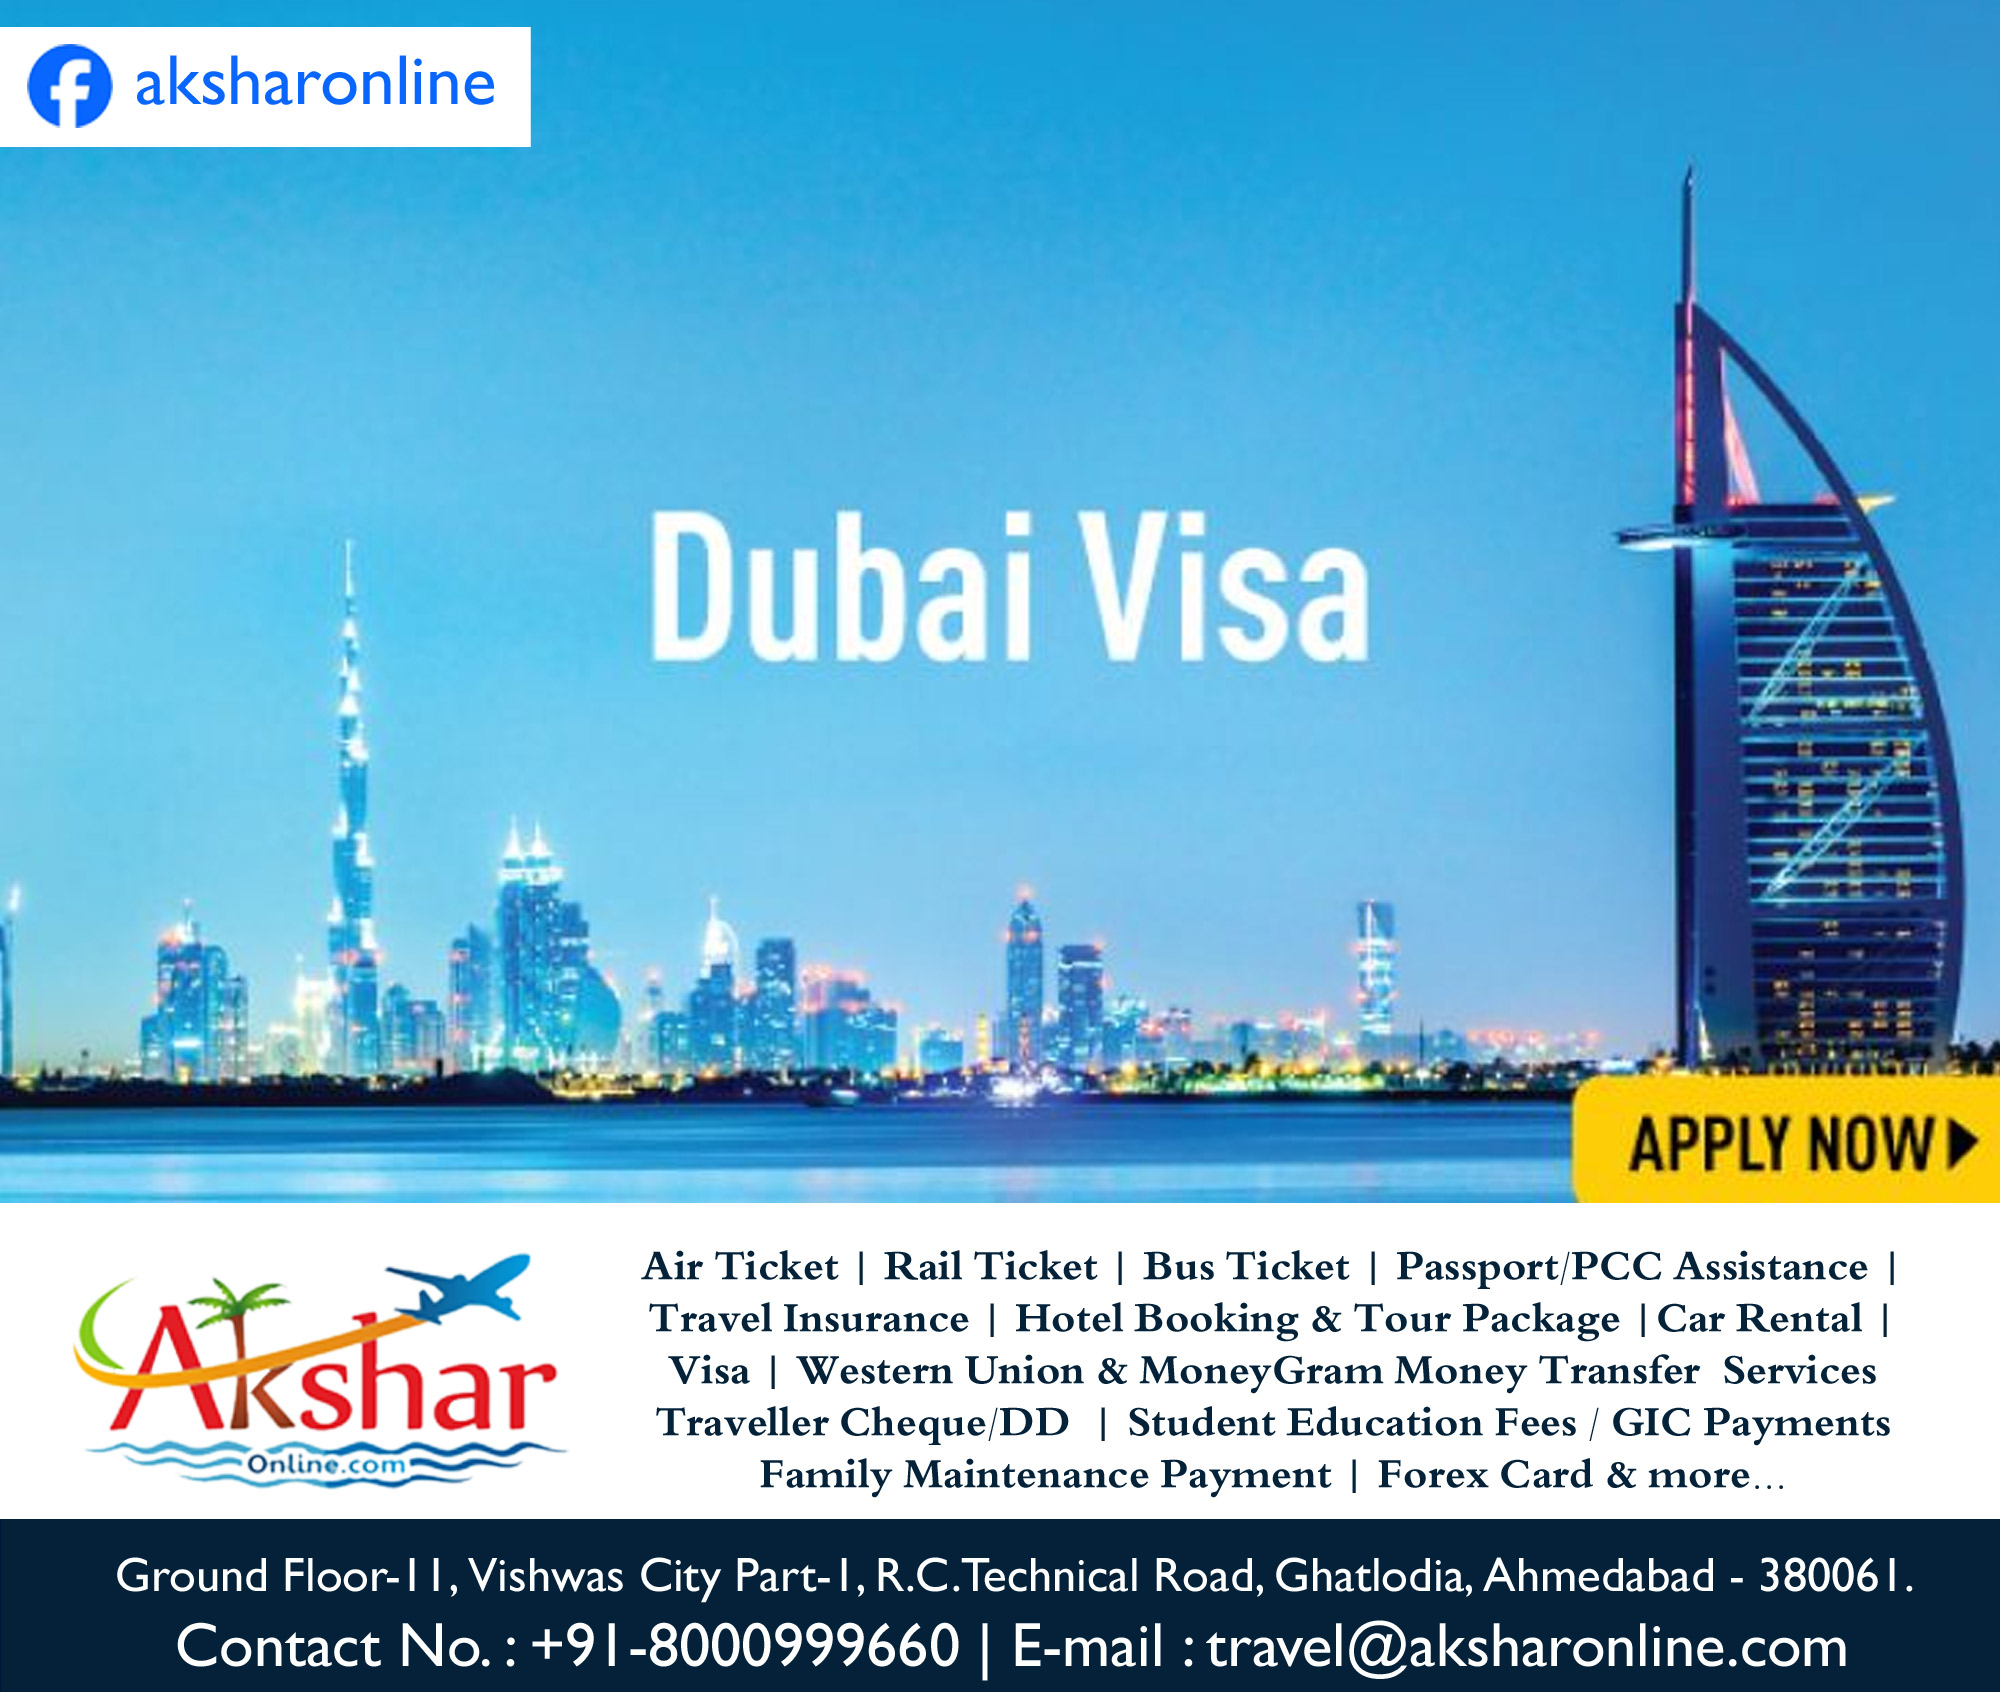 🌟 Explore the dazzling city of Dubai with ease! 🌟 ✈️ Planning a trip to the UAE? We've got you covered with our hassle-free 30-days UAE Tourist Single Entry Visa package, complete with COVID insurance! ✈️ 🛡️ Your safety is our priority! With comprehensive COVID insurance included, travel worry-free and enjoy every moment of your trip. 📋 Required Documents: Passport Front & Back Scan Page Photograph PAN card 💰 Price: 7500/- per person 📞 To book your UAE Tourist Visa, call/WhatsApp us at +91-8000999660. Don't miss out on this incredible opportunity to experience the magic of the UAE! Book now and embark on the adventure of a lifetime! ✨ #UAETouristVisa #uaevisa #dubaivisa #dubaitouristvisa #aksharonline